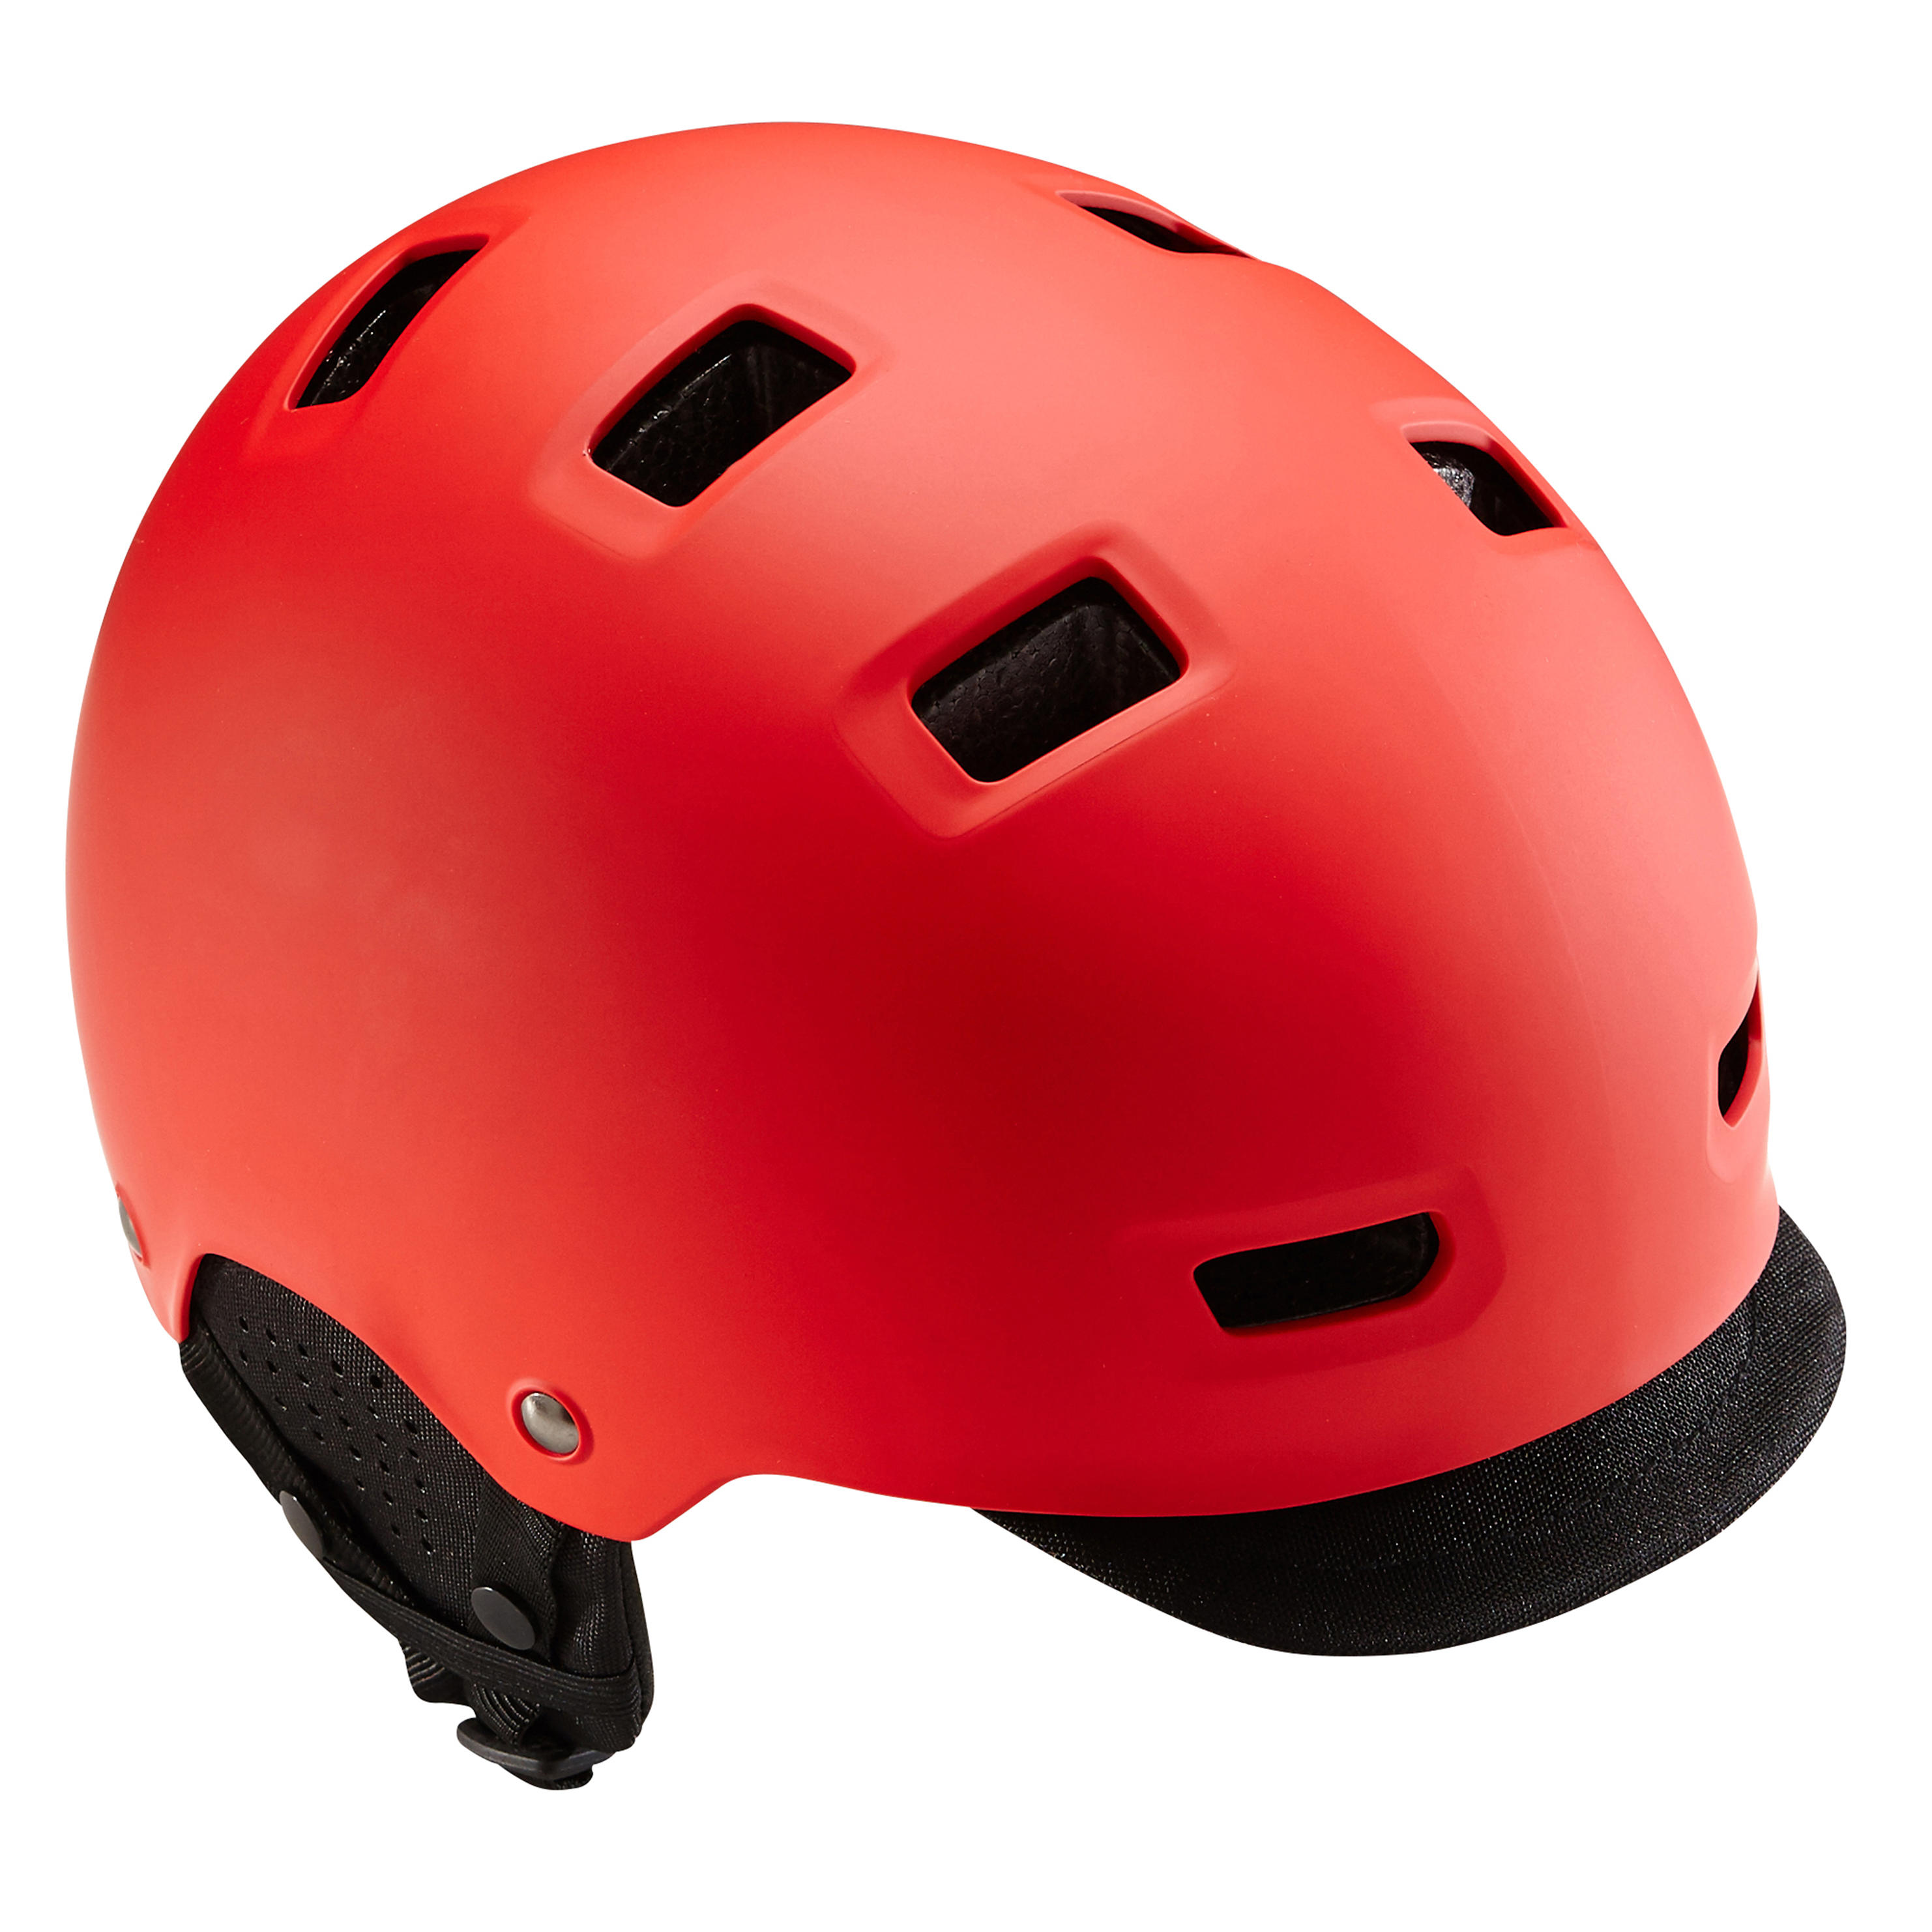 BTWIN 500 City Cycling Bowl Helmet - Red